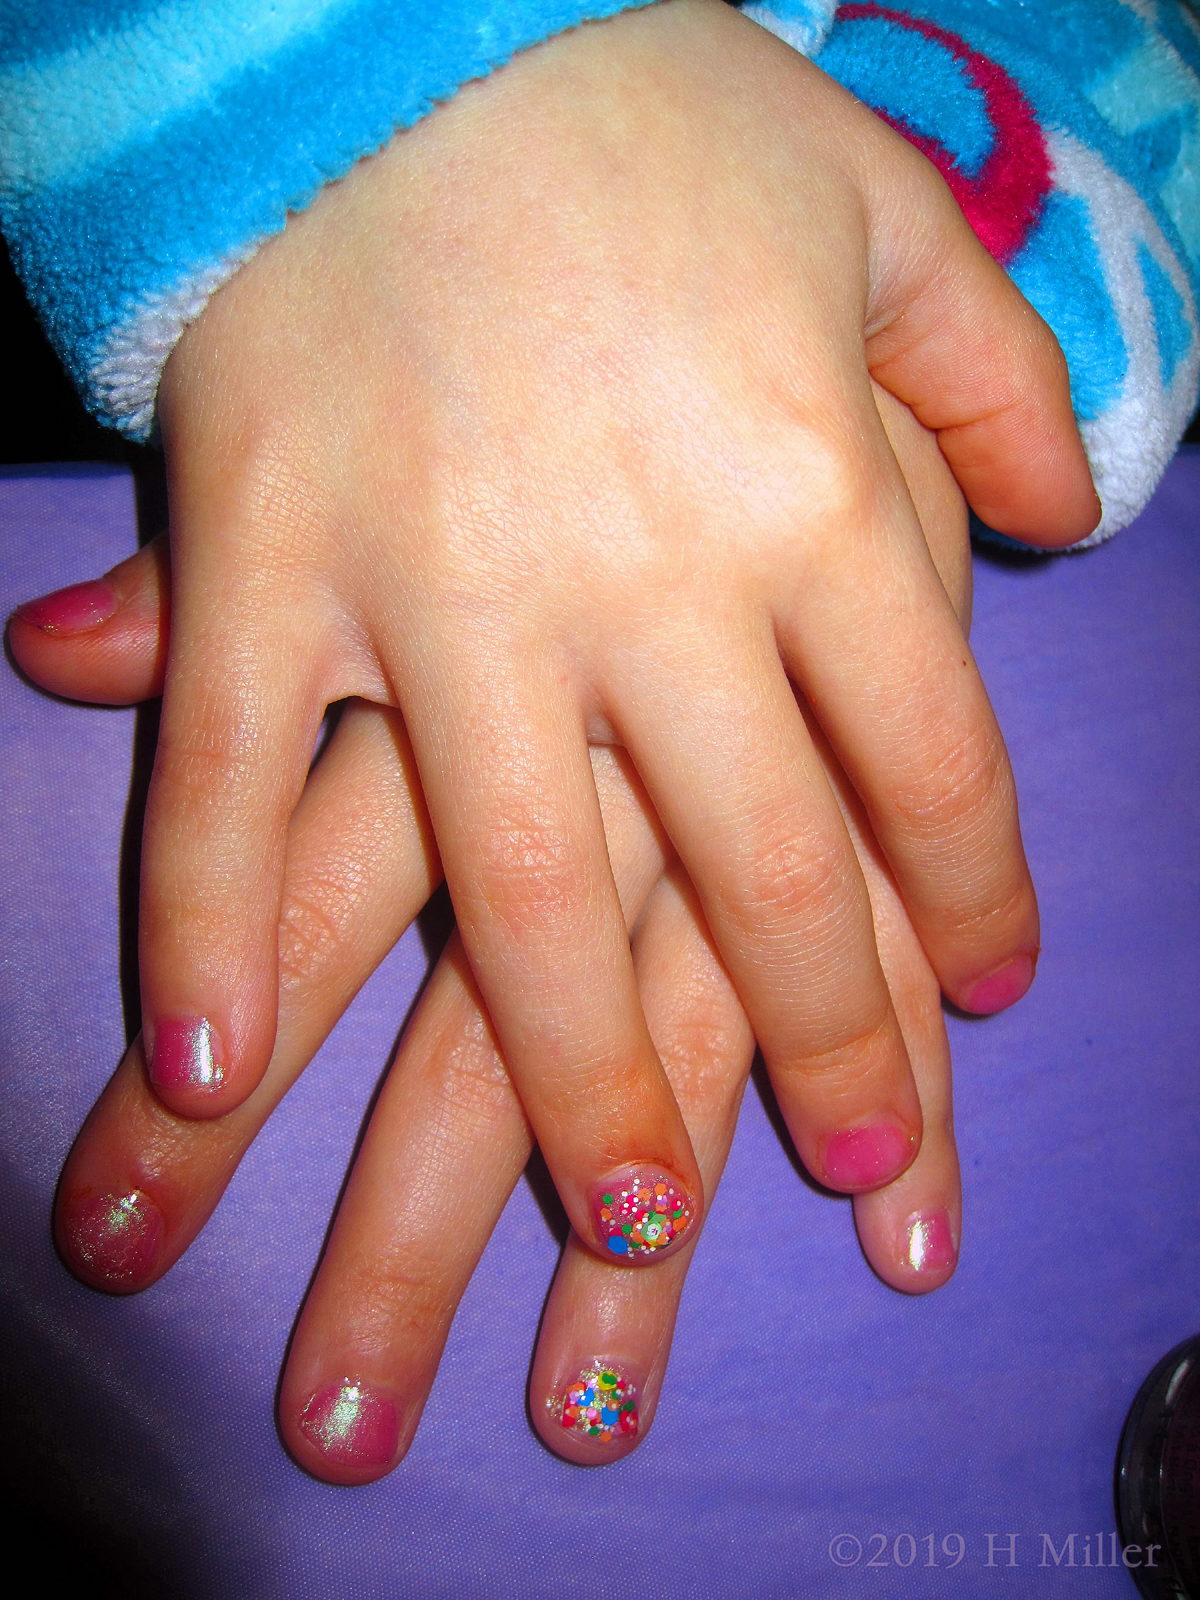 Blush Pink Nail Coat With Rainbow Sparkled Accent Nail For This Neat Kids Spa Manicure!